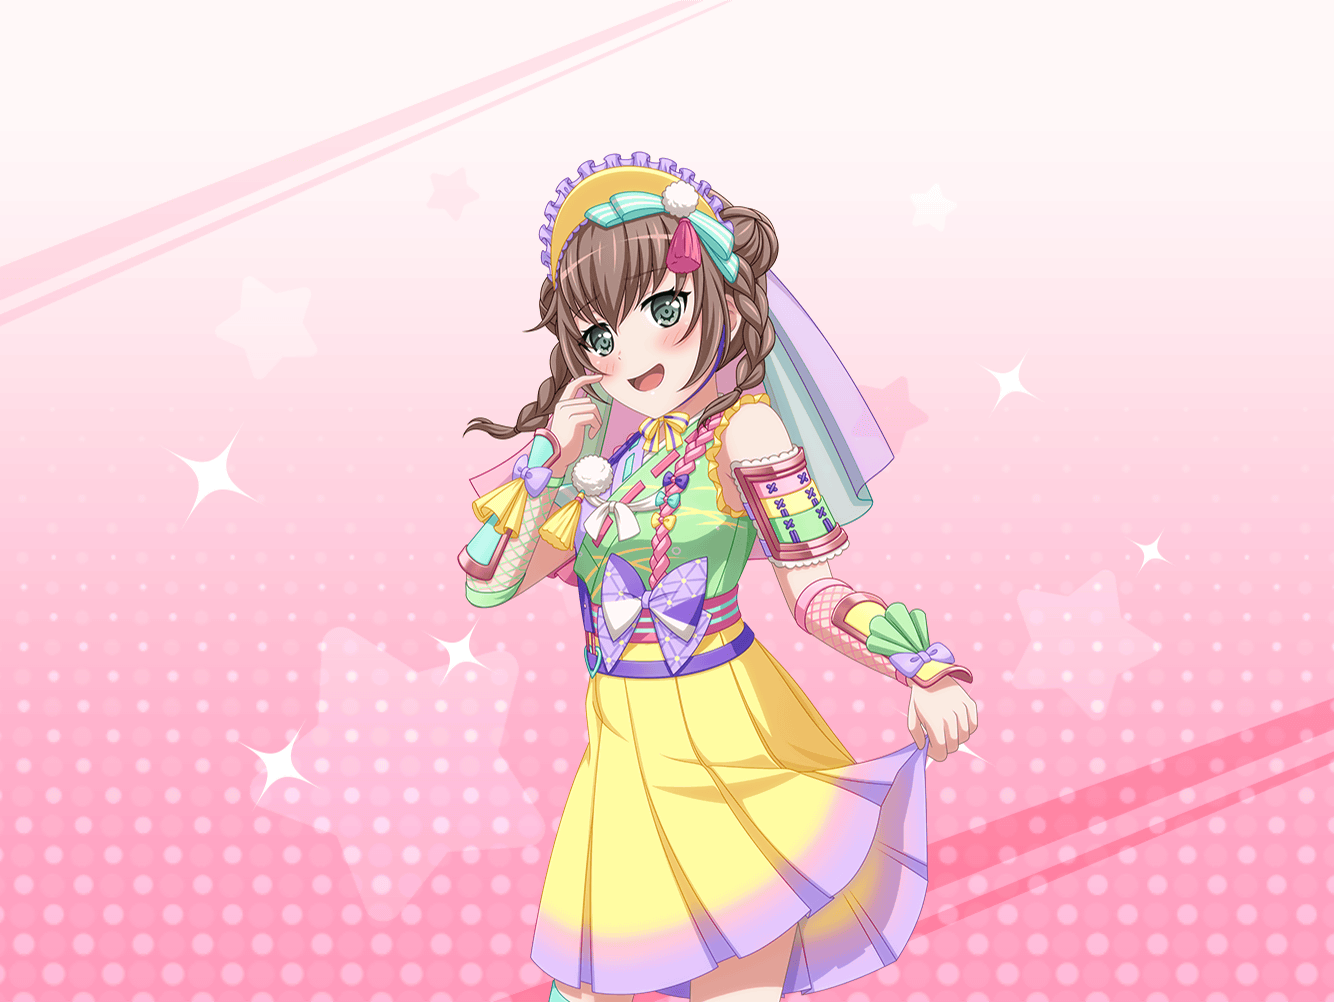 BanG Dream! Updates on X: RT @BandoriParty: 🇯🇵 Get a look at our next  gacha accompanying the Dreamy♪Pastel Road event! 🎗️ The featured 4☆ cards  for this Permanent b… / X